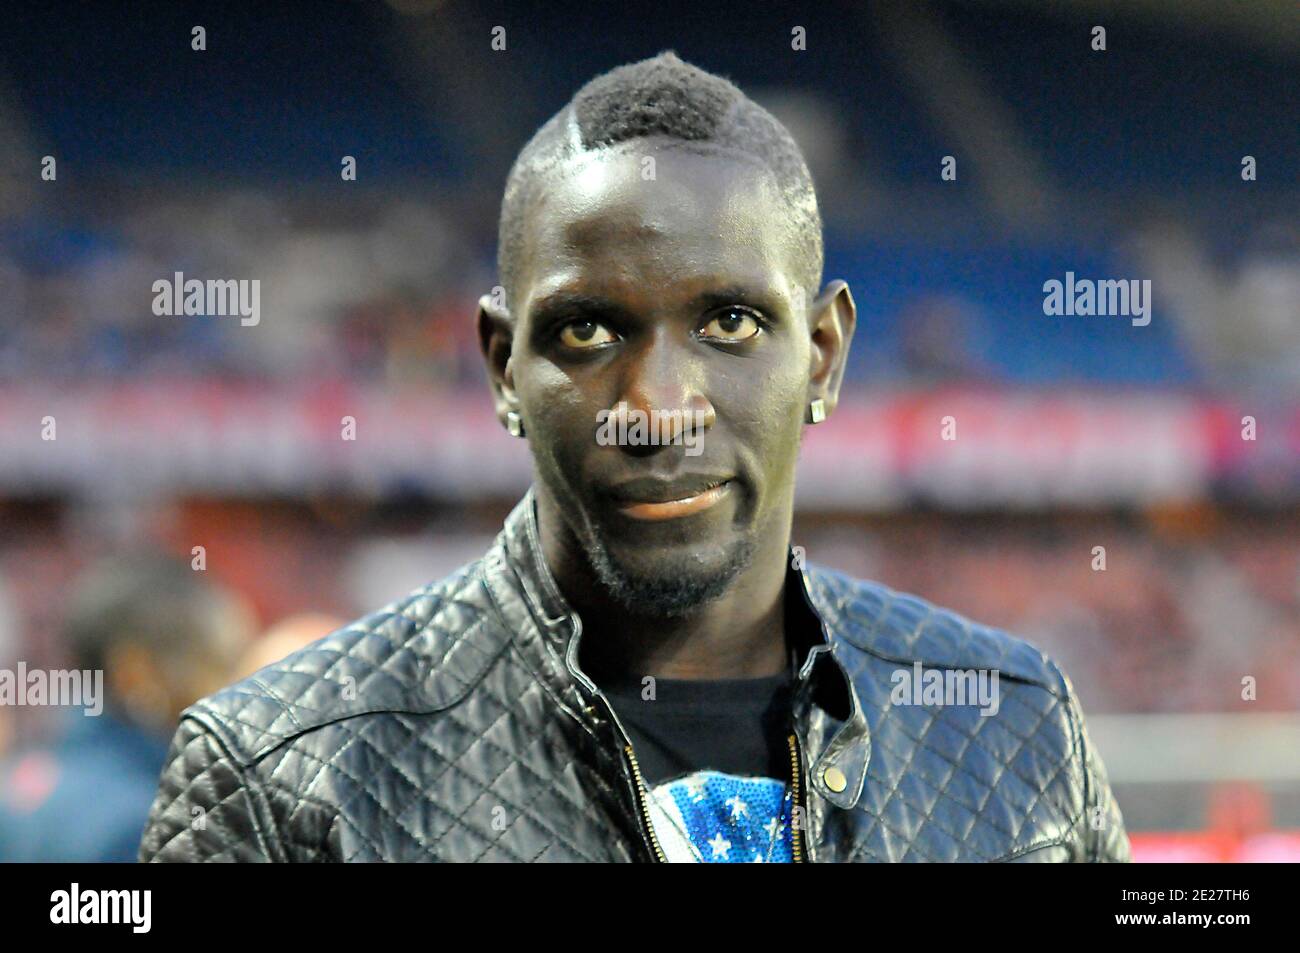 Psg's Mamadou Sakho during the UEFA Cup second knockout round first leg  game soccer match PSG vs Benfica, at the Parc des Princes stadium in Paris,  France, on March 8, 2007. PSG